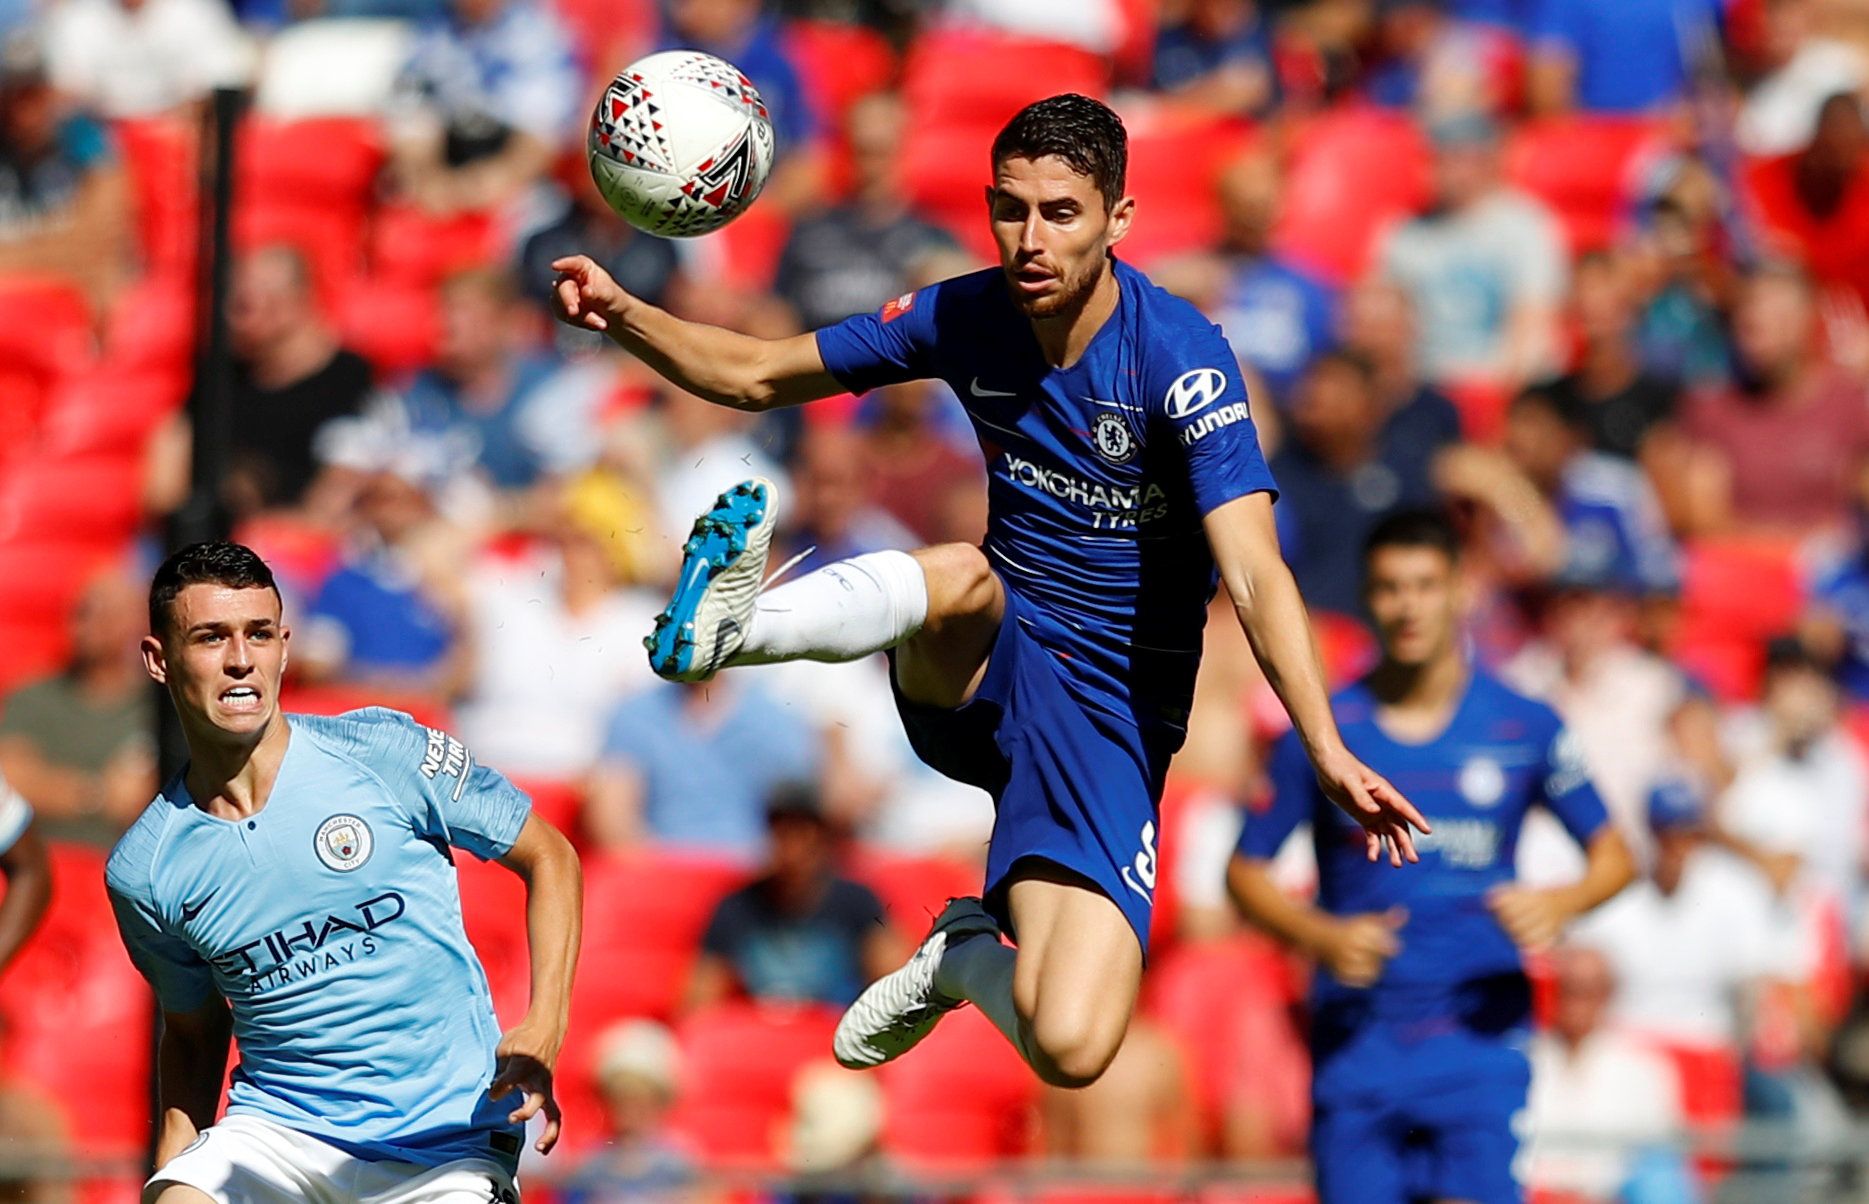 Chelsea's Jorginho challenges Man City's Phil Foden for the ball at the Community Shield